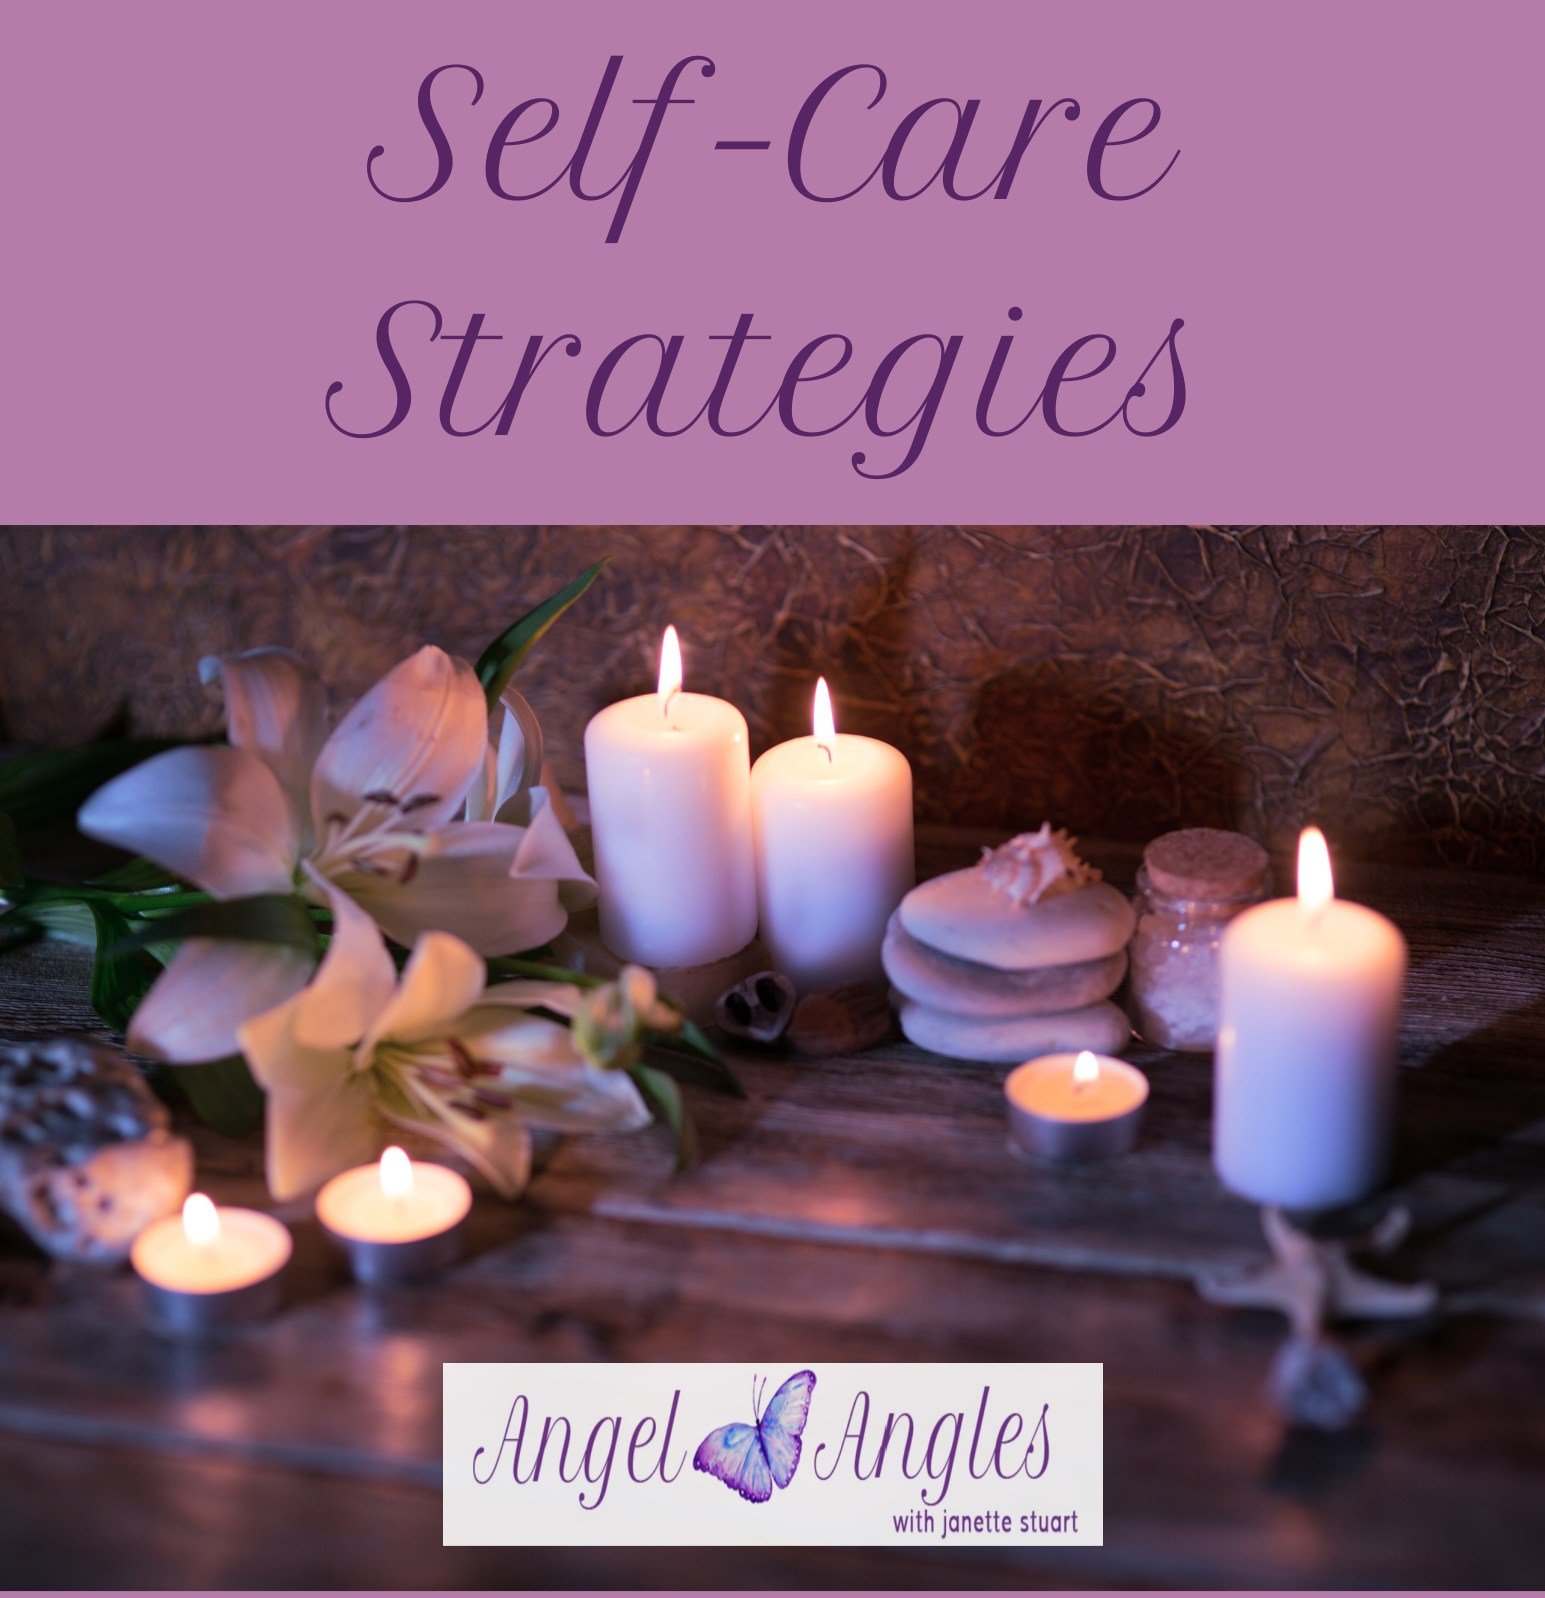 In honor of Mental Health Awareness Month a reminder that Self-care is so important and you are worthy and deserving of having an excellent self-care practice. It benefits every relationship. 

I compiled a 30+ page Self-Care Strategies pdf with tips